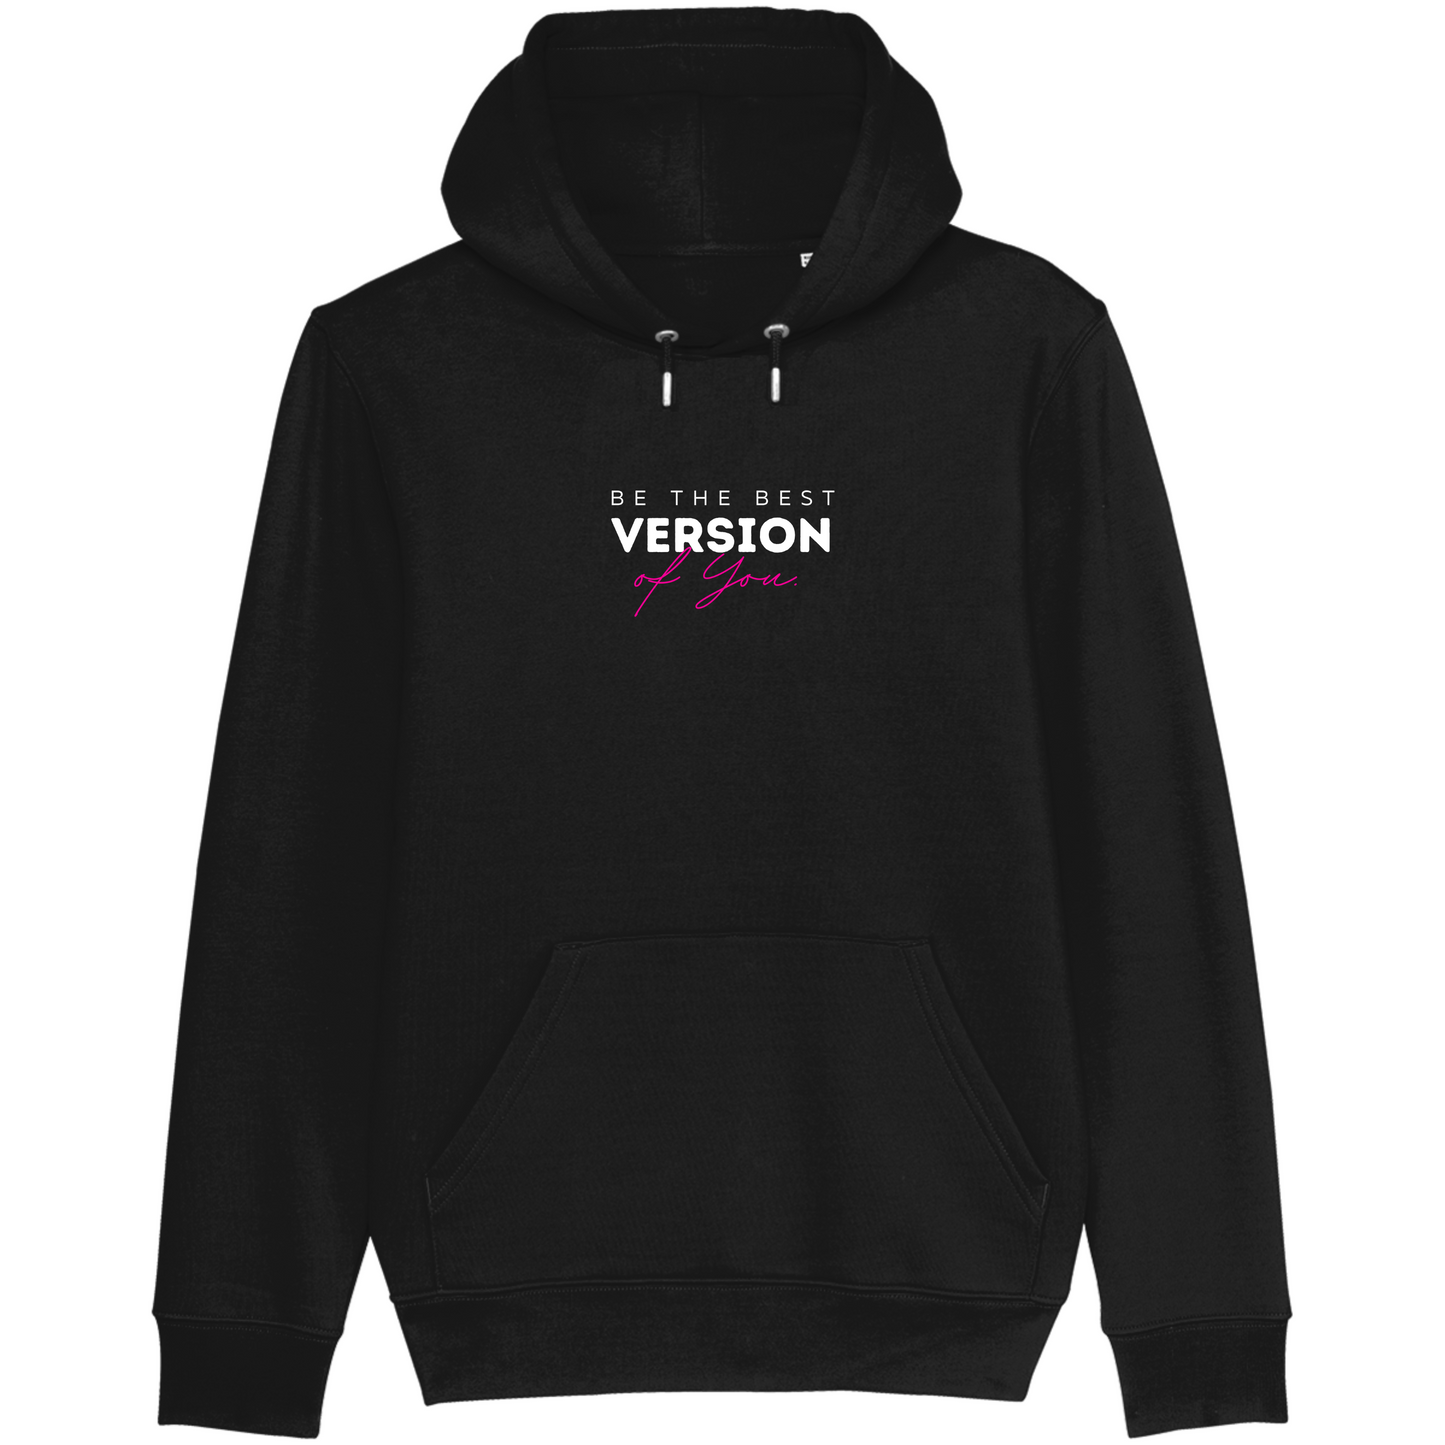 Be The Best Version Of You - Hoodie